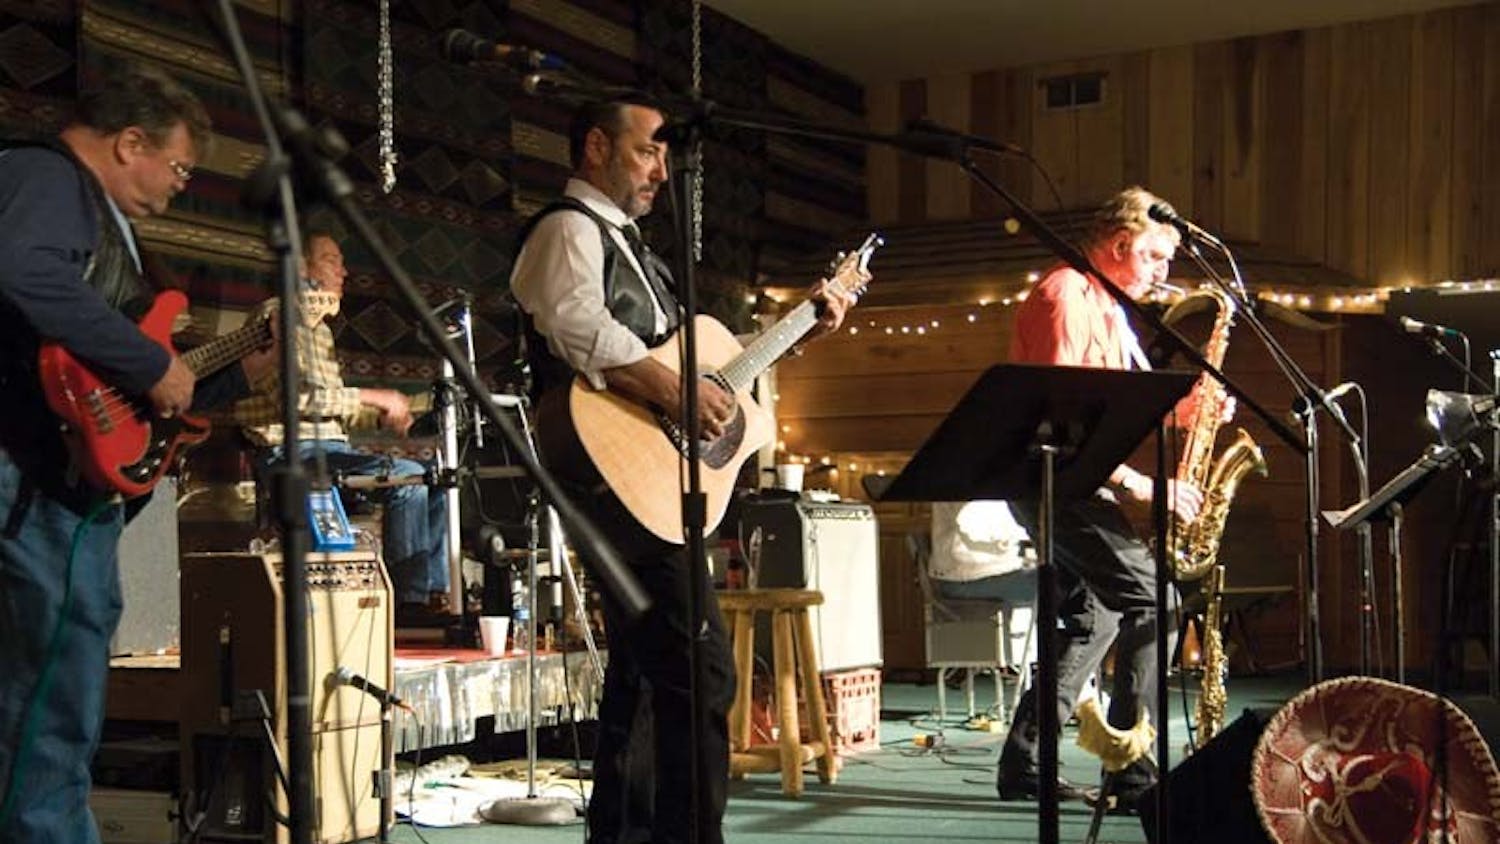 Mike Robertson & Smooth Country got the crowd on their feet at Mike’s Dance Barn.